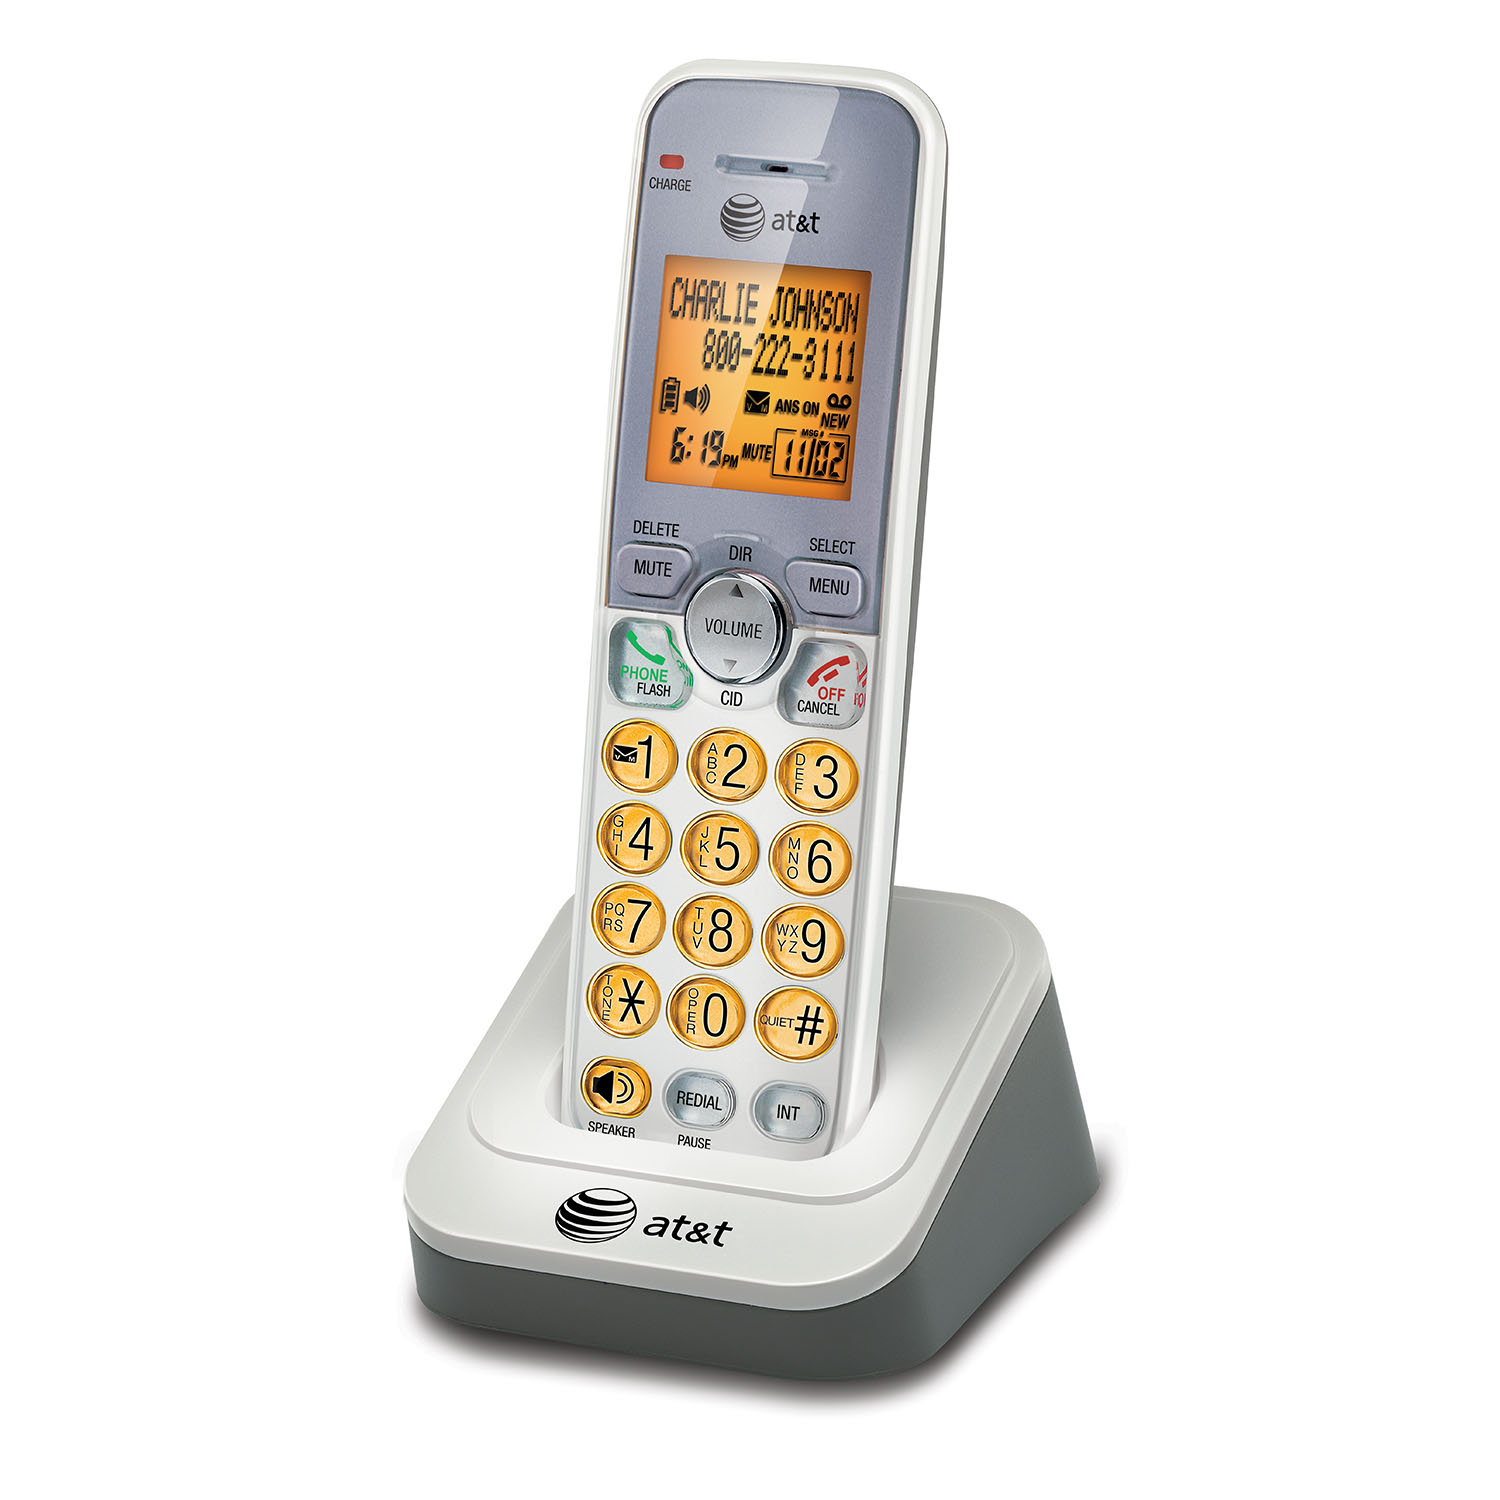 5 handset cordless answering system with caller ID/call waiting - view 5